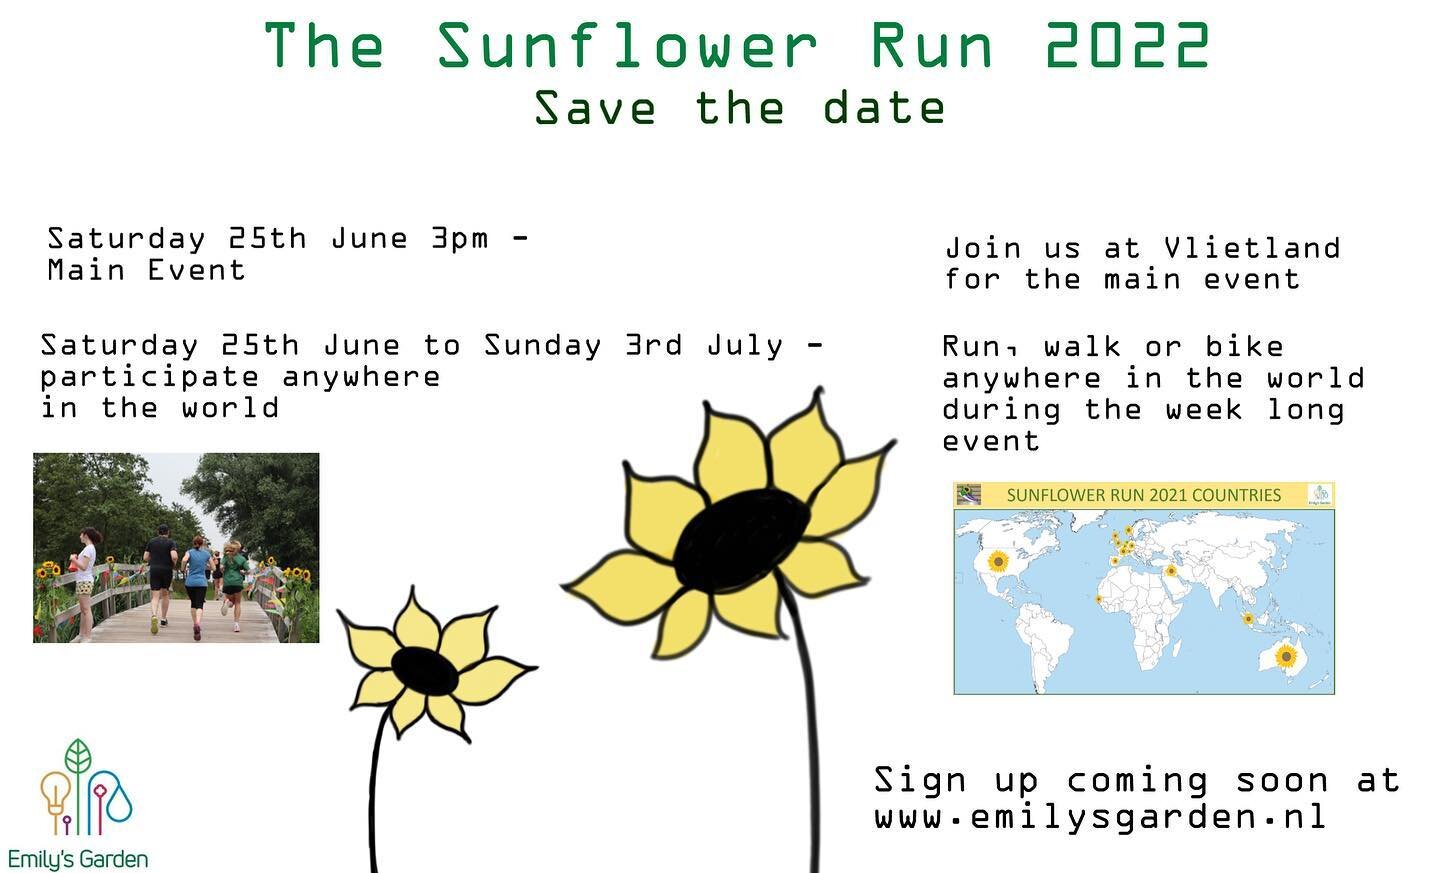 Save the date- Sunflower Run 2022 -25th June 3pm at Vlietland , Voorschoten.  Or 25th June -3rd July participate wherever you are in the world.  To find out more about the projects that we support go to www.emilysgarden.nl